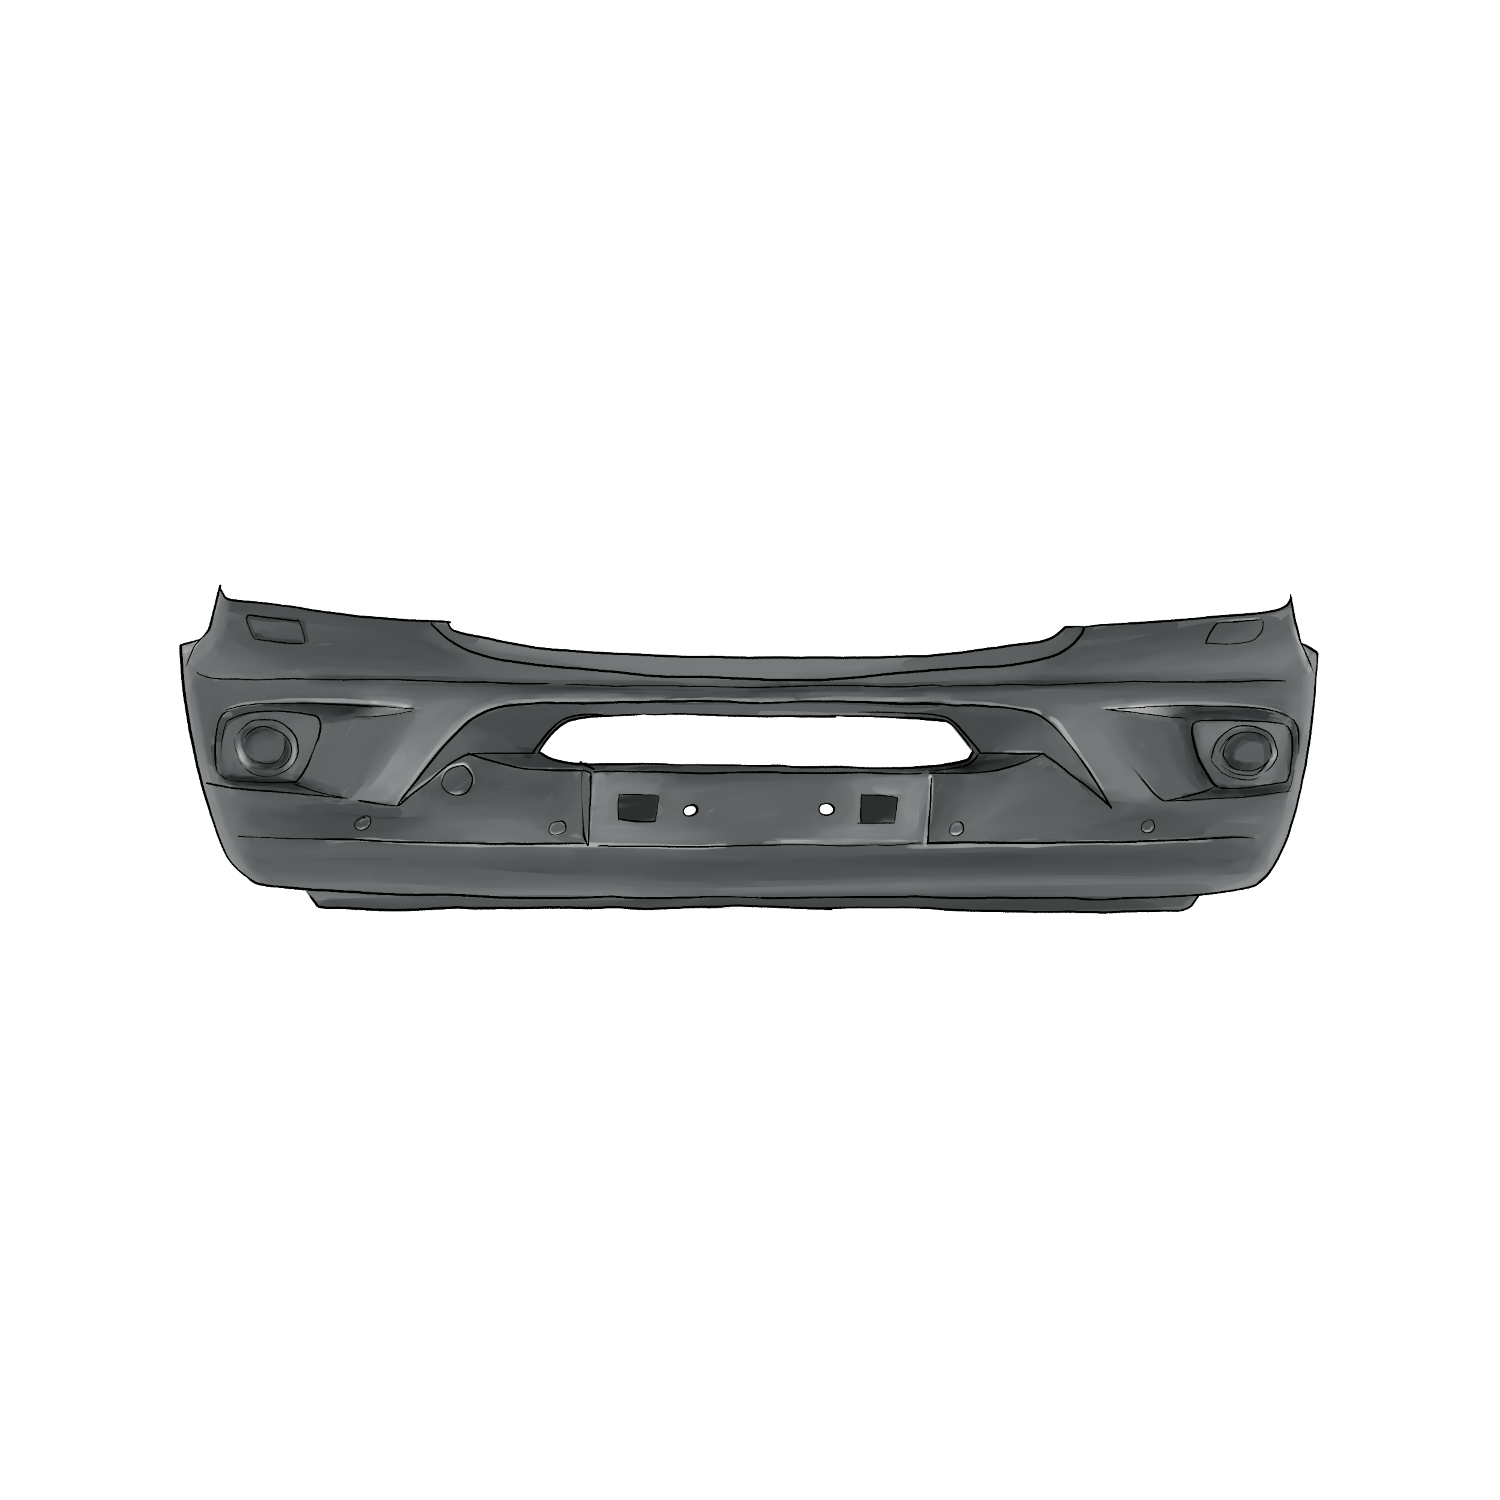  Product image 1 of the product “Bumper OX5 ”